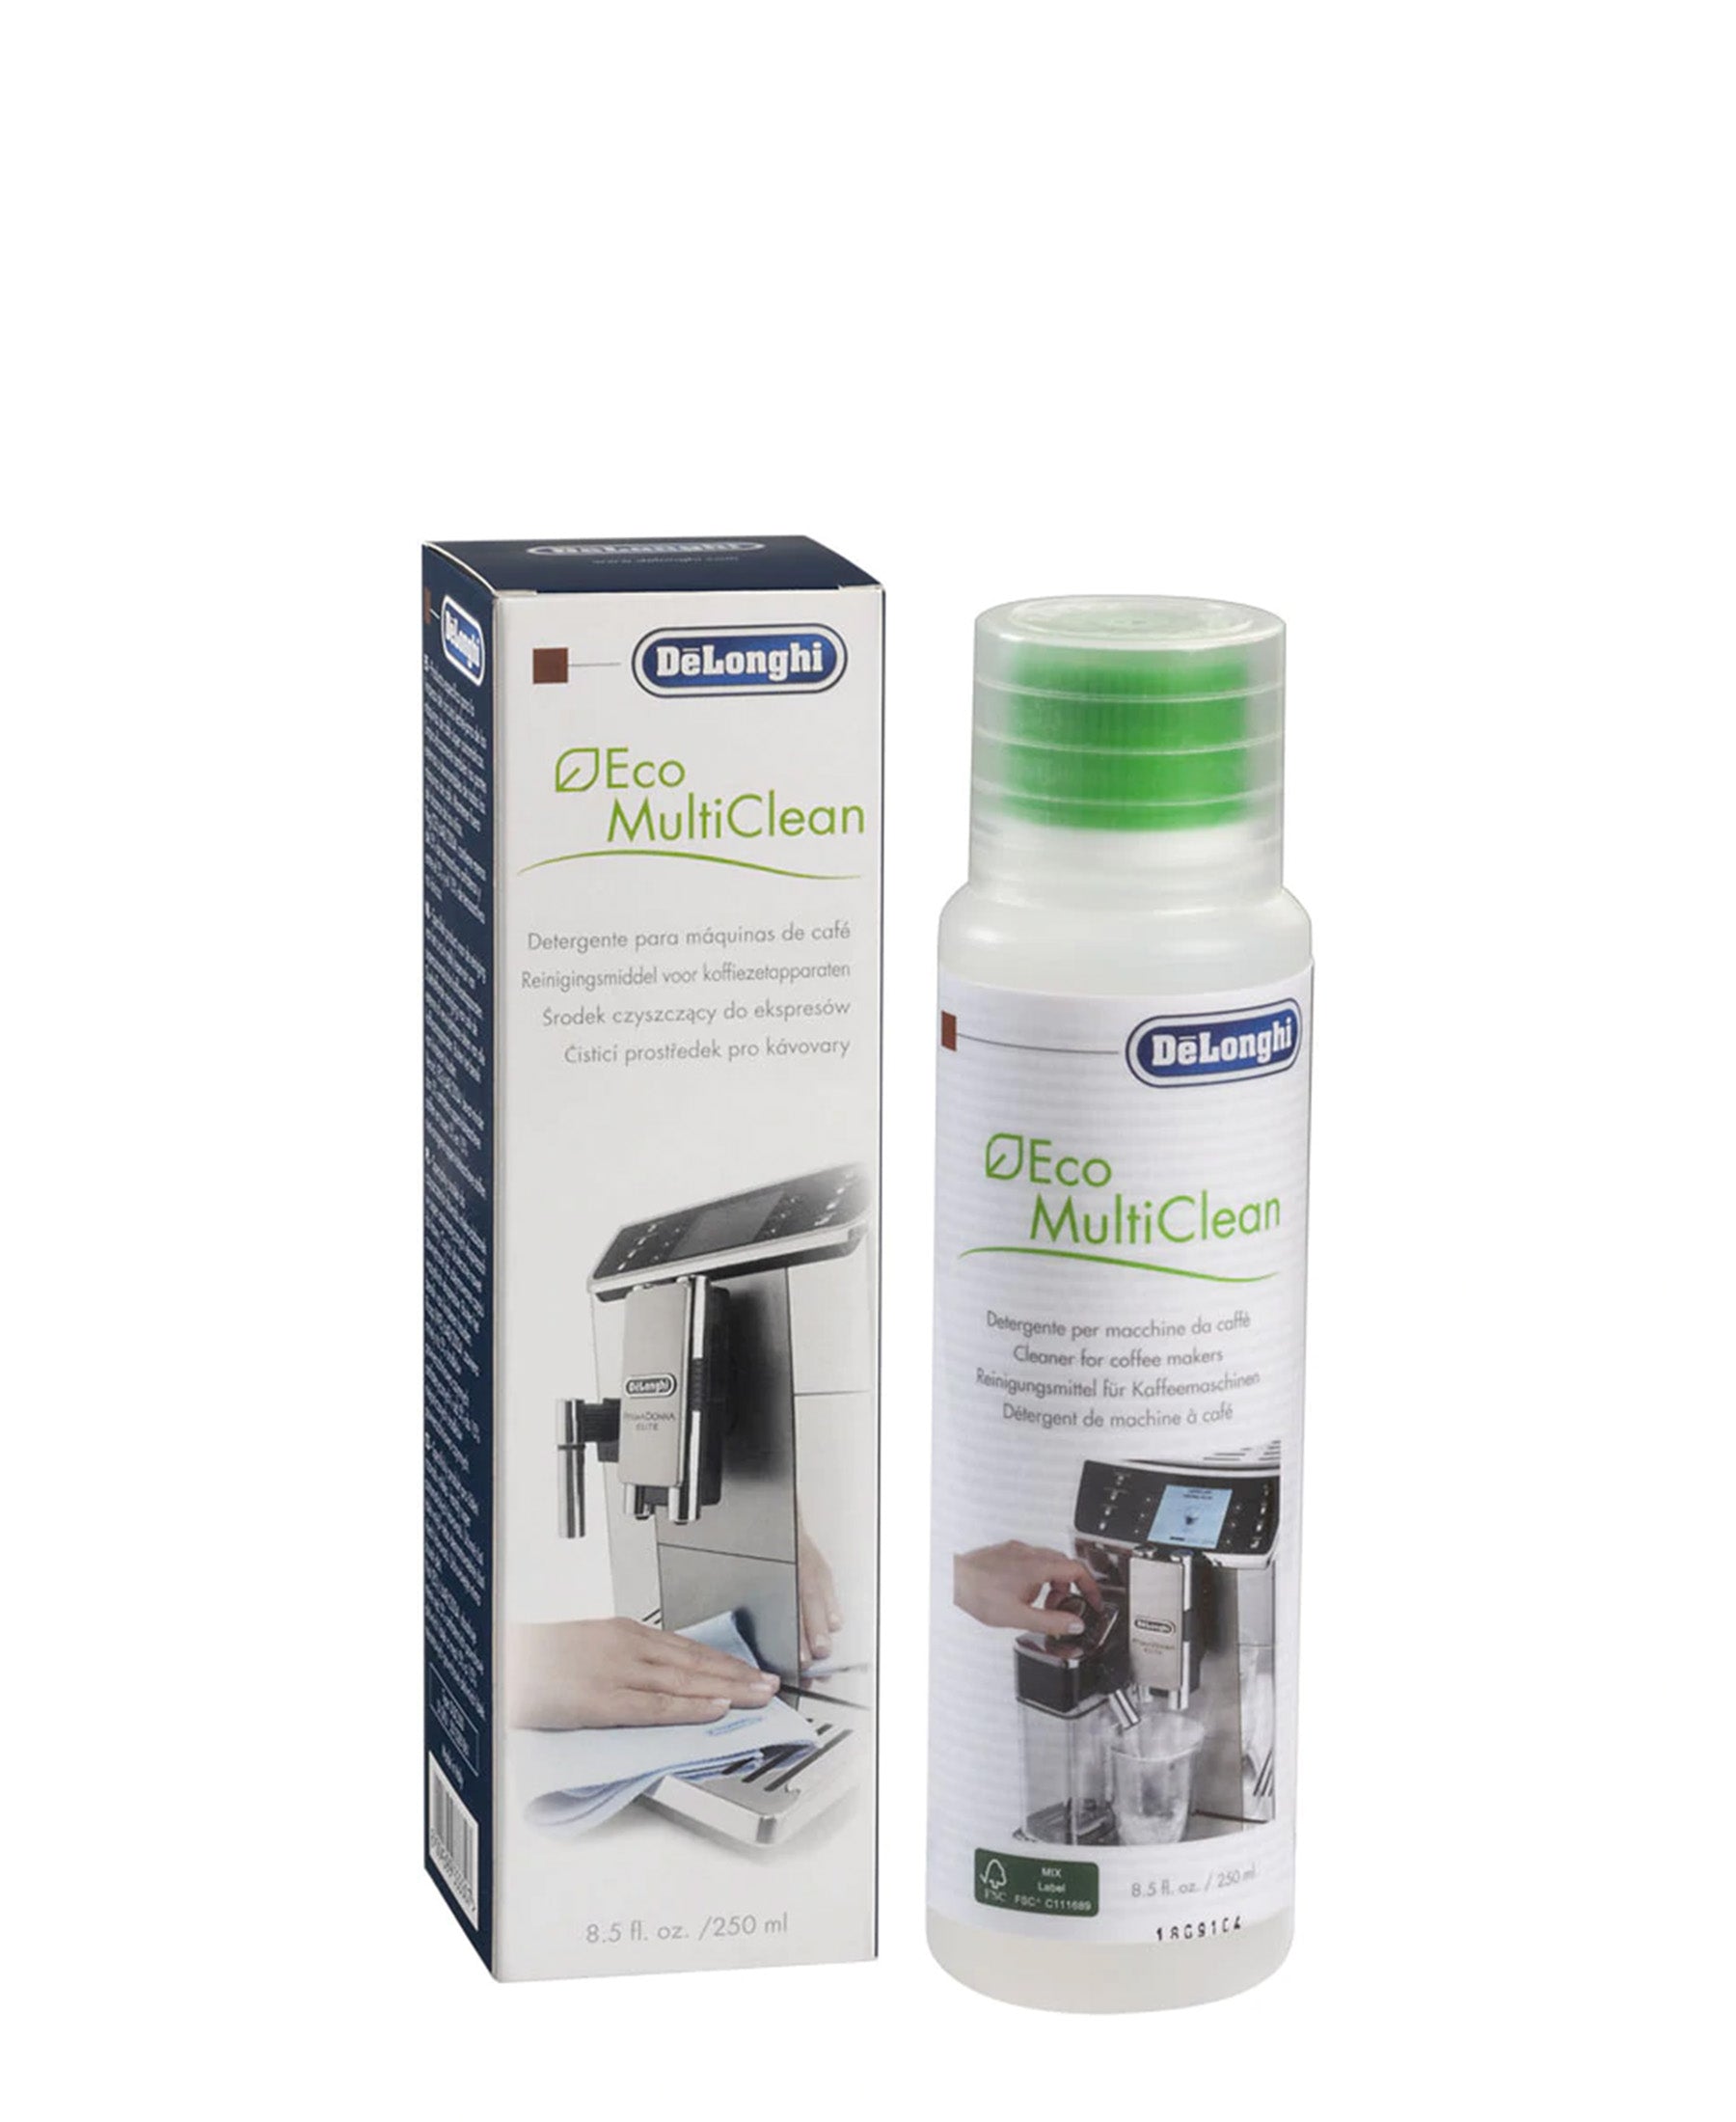 Delonghi Eco MultiClean Milk System Cleaner - White